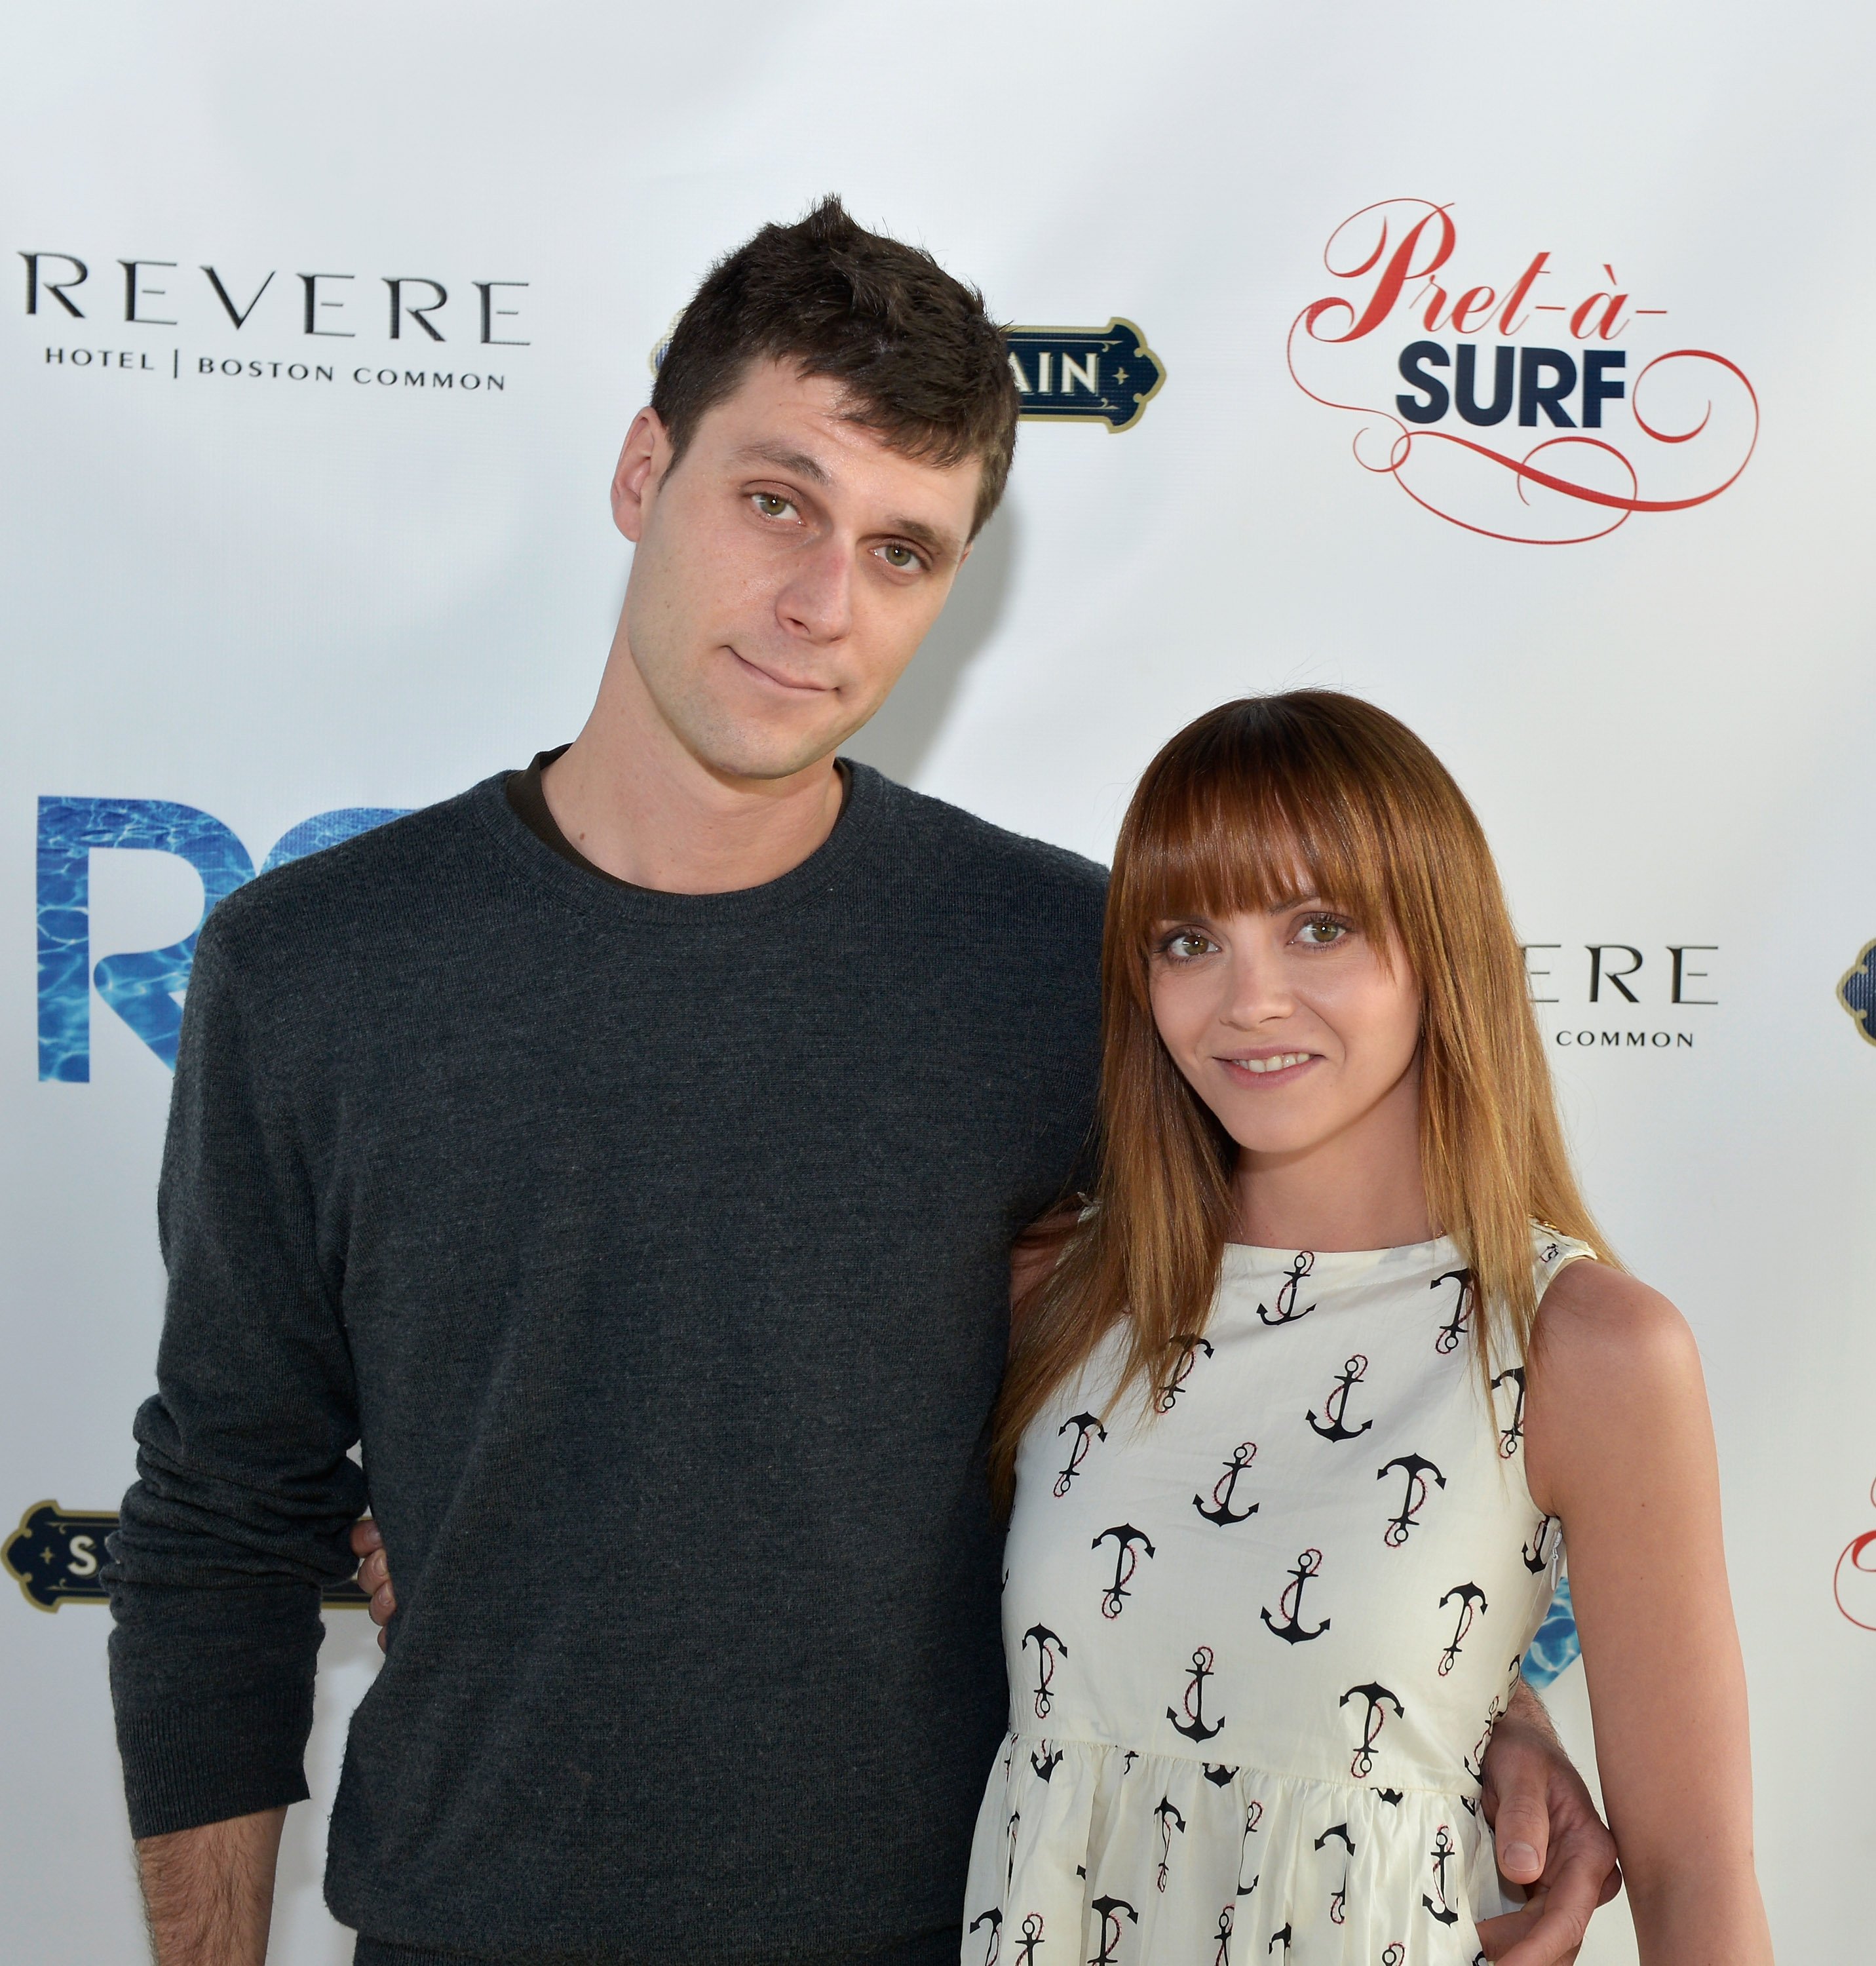 James Heerdegen and Christina Ricci attend the Rooftop @ Revere Launch Party at The Revere Hotel on May 18, 2013, in Boston, Massachusetts. | Source: Getty Images